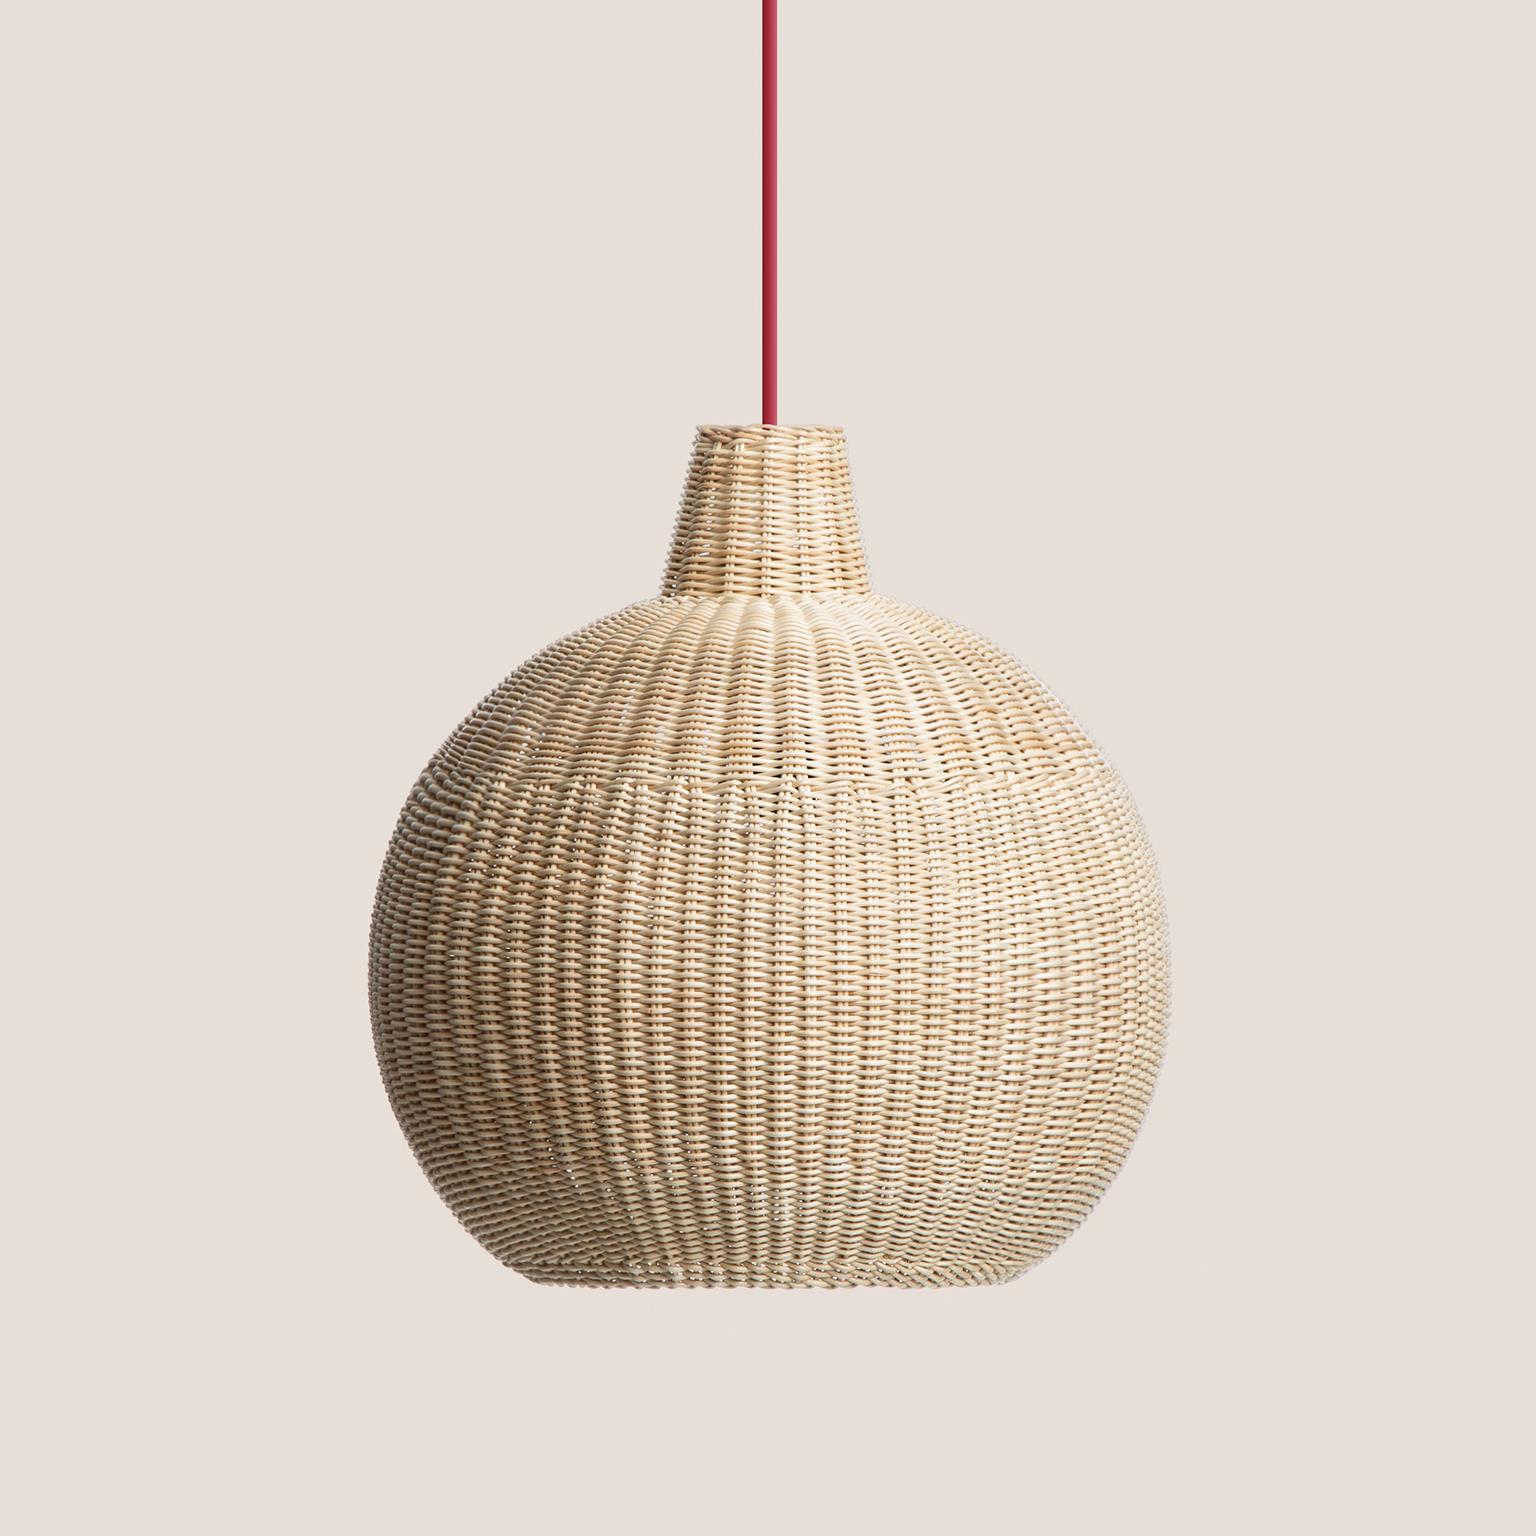 Pendant light with lampshade in intertwined wicker. 138 meters of wicker are carefully selected and then skillfully shaped for over 7 hours of patient intertwining. The Sfera lamp is subject to a water-color protective treatment of natural, green,